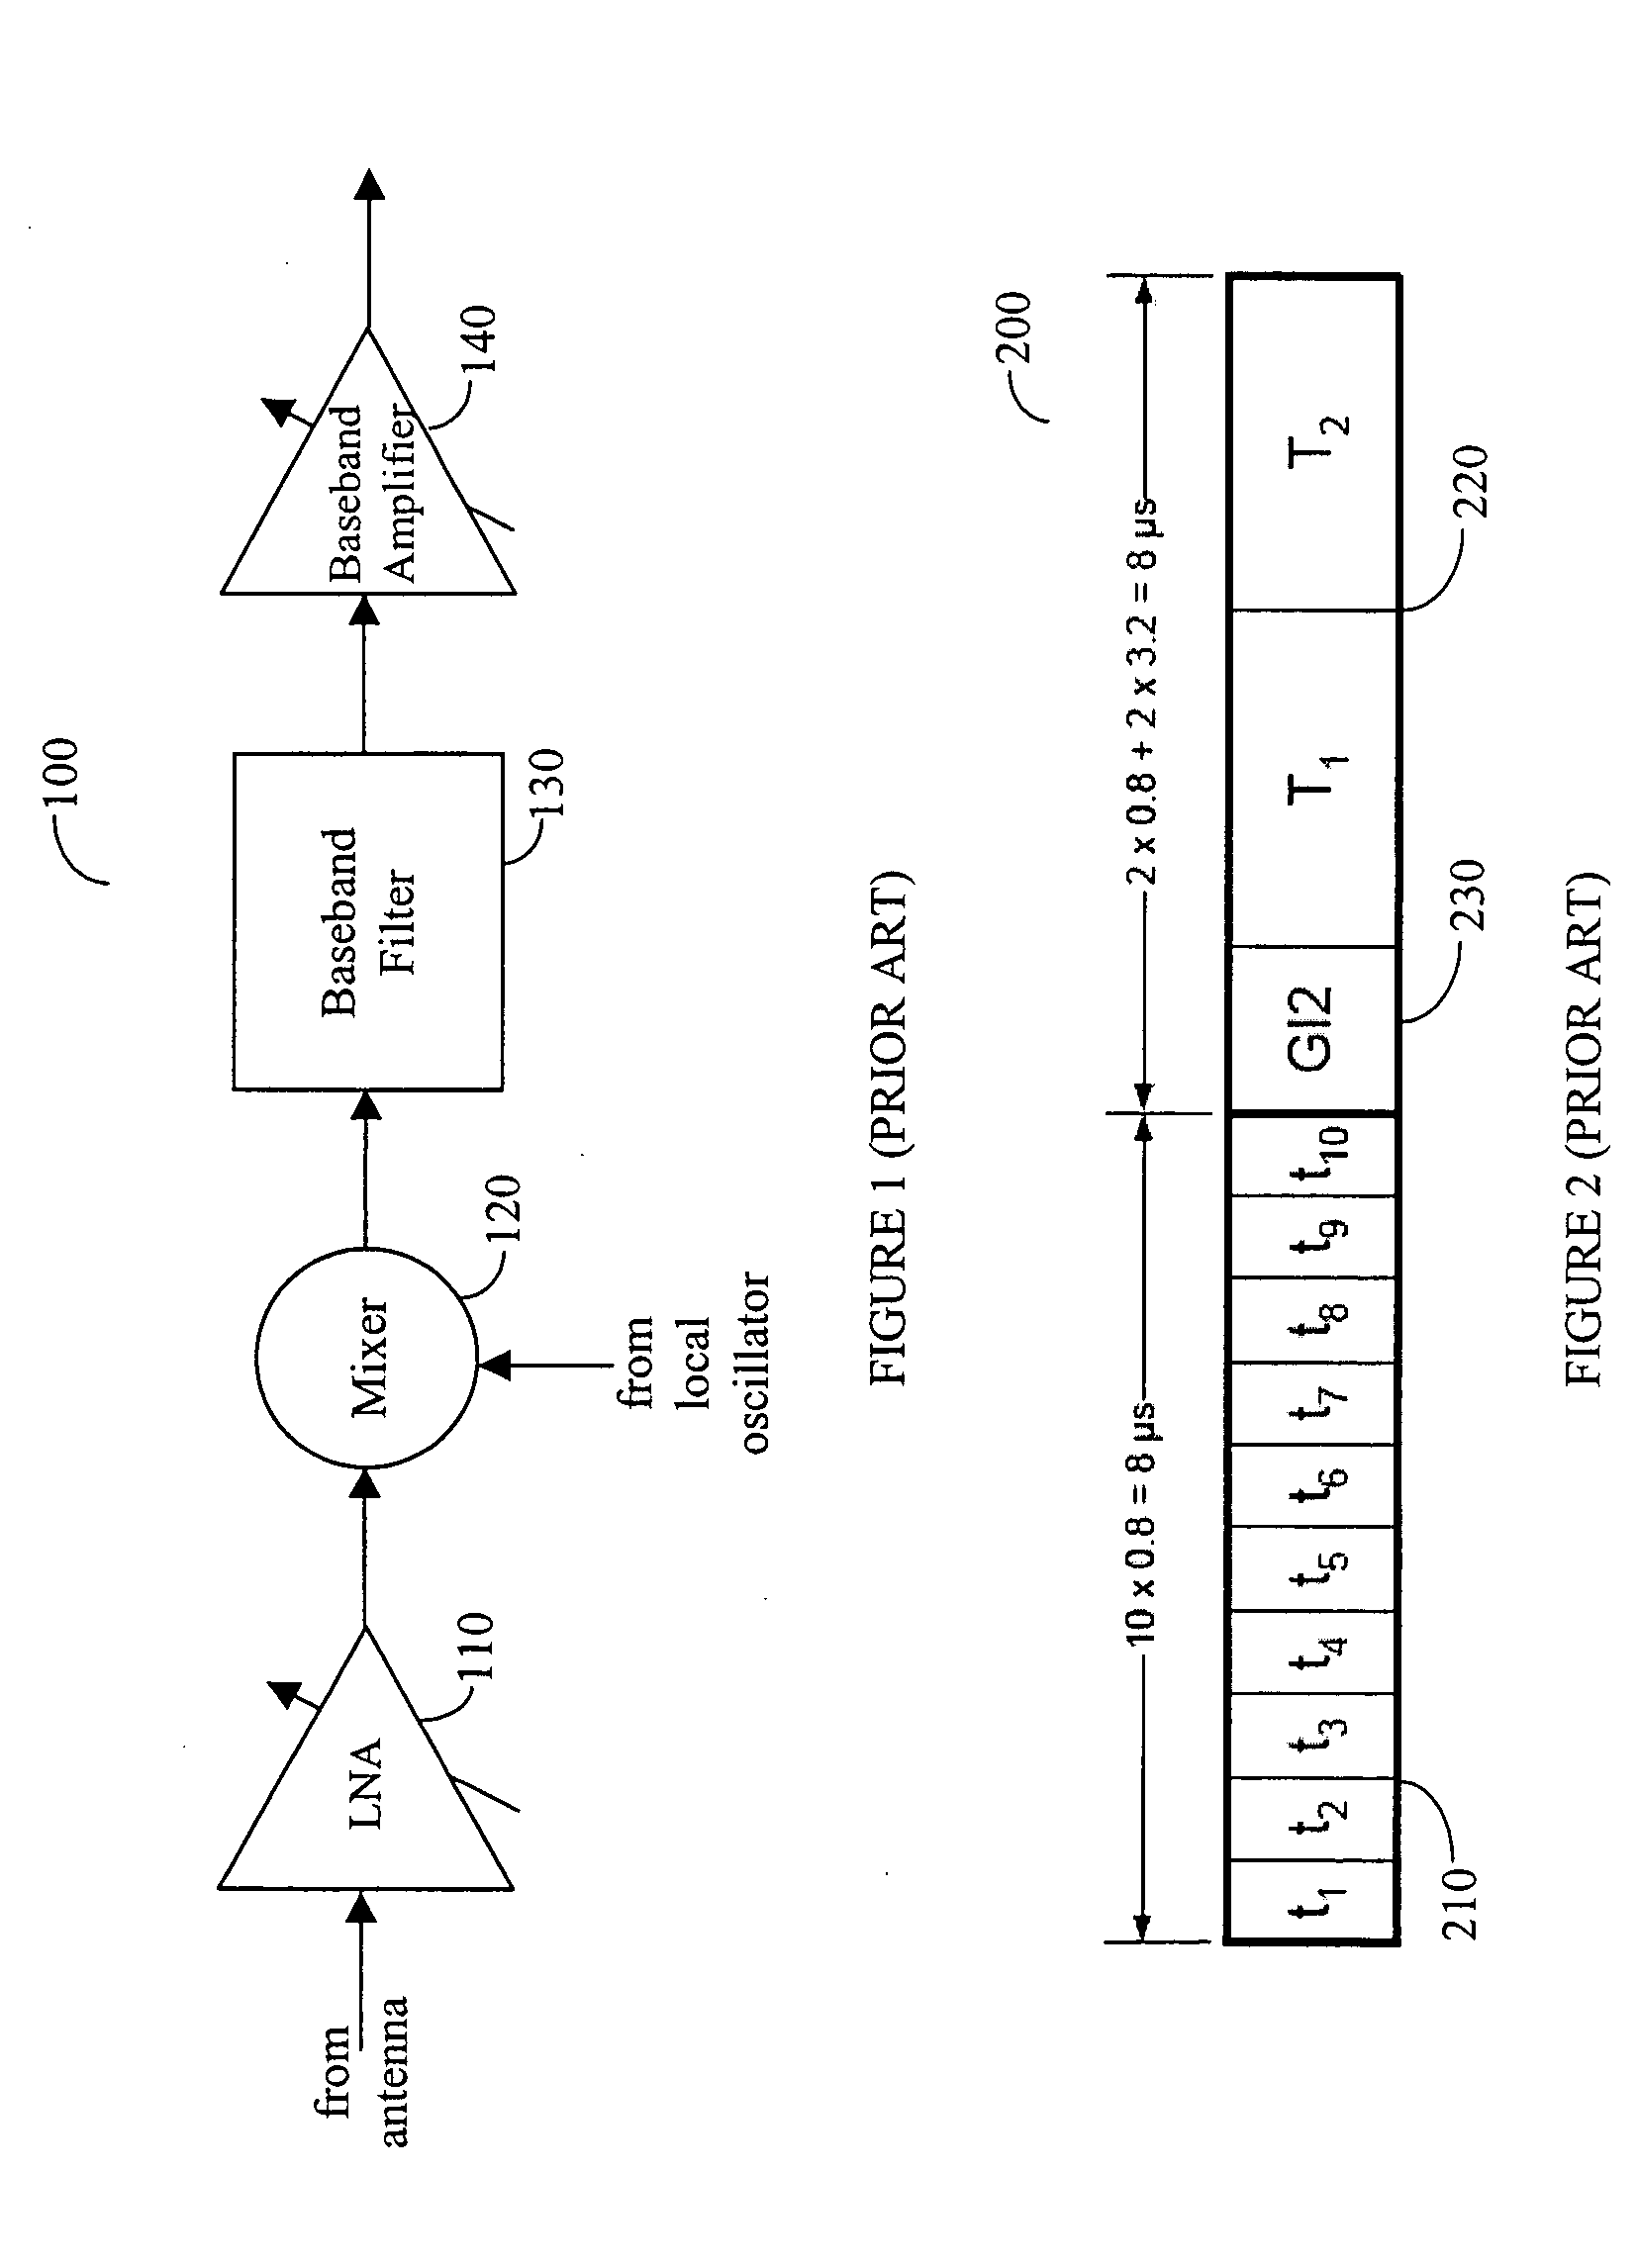 Apparatus and methods for eliminating DC offset in a wireless communication device